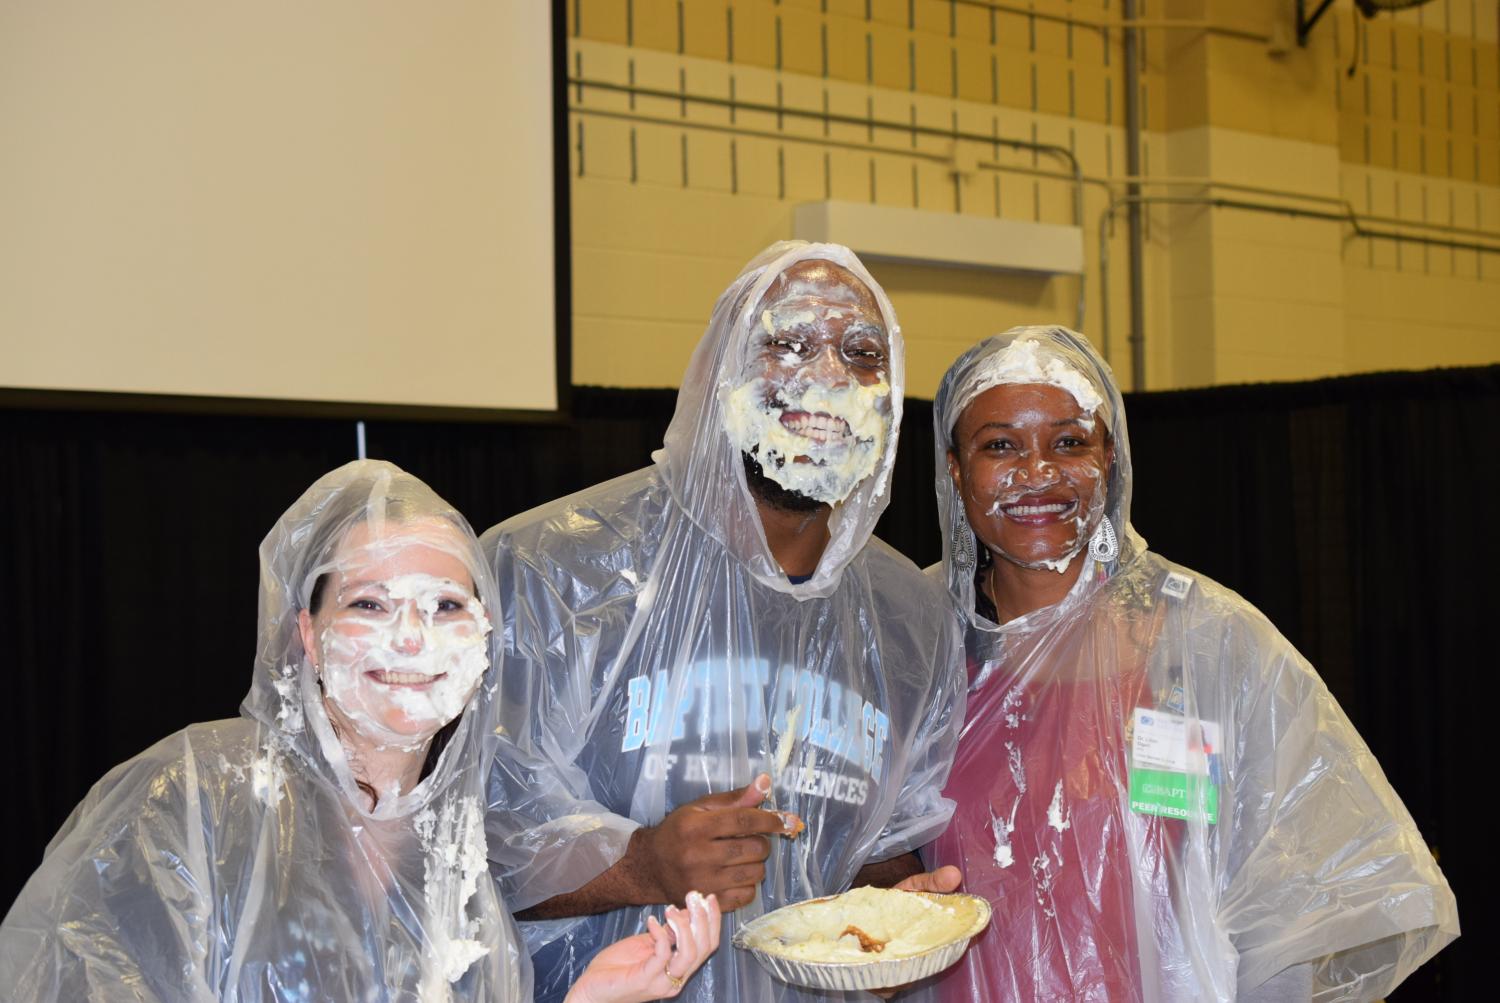 Pie in the face fundraiser